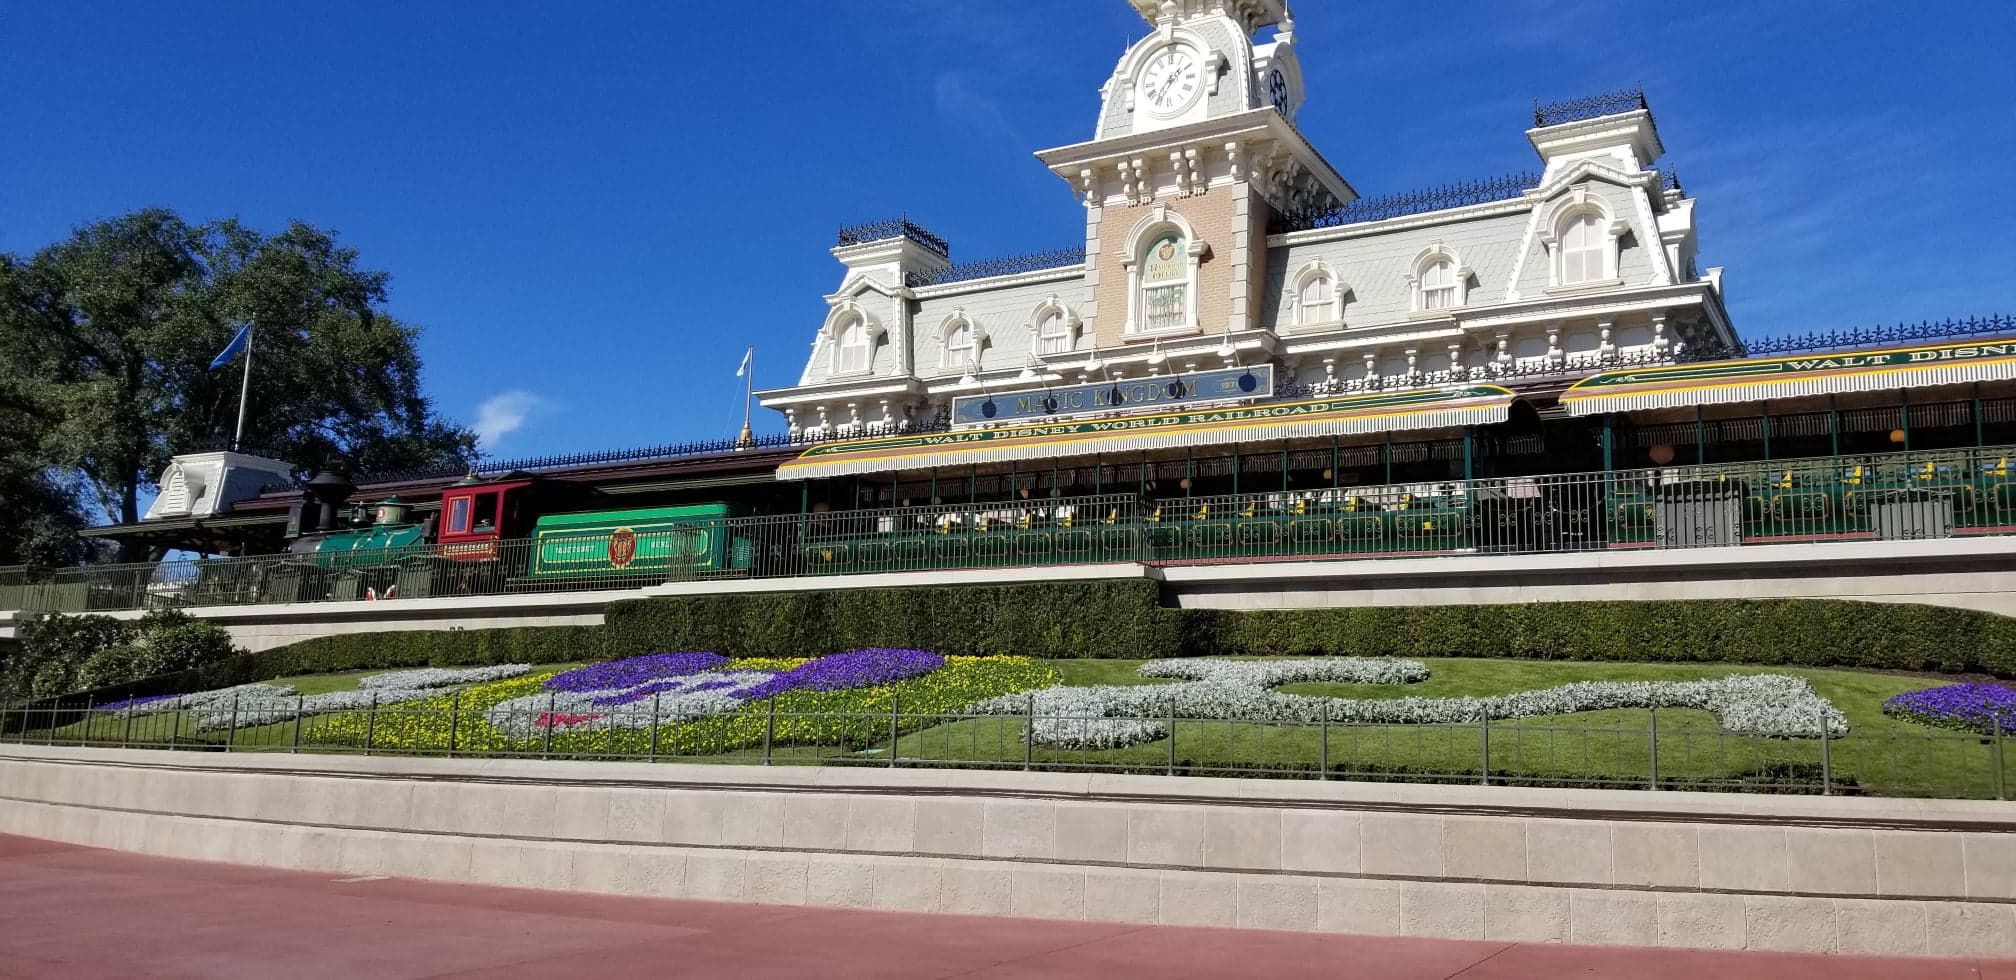 Current Technical Difficulties Lead to Major Delays at the Magic Kingdom